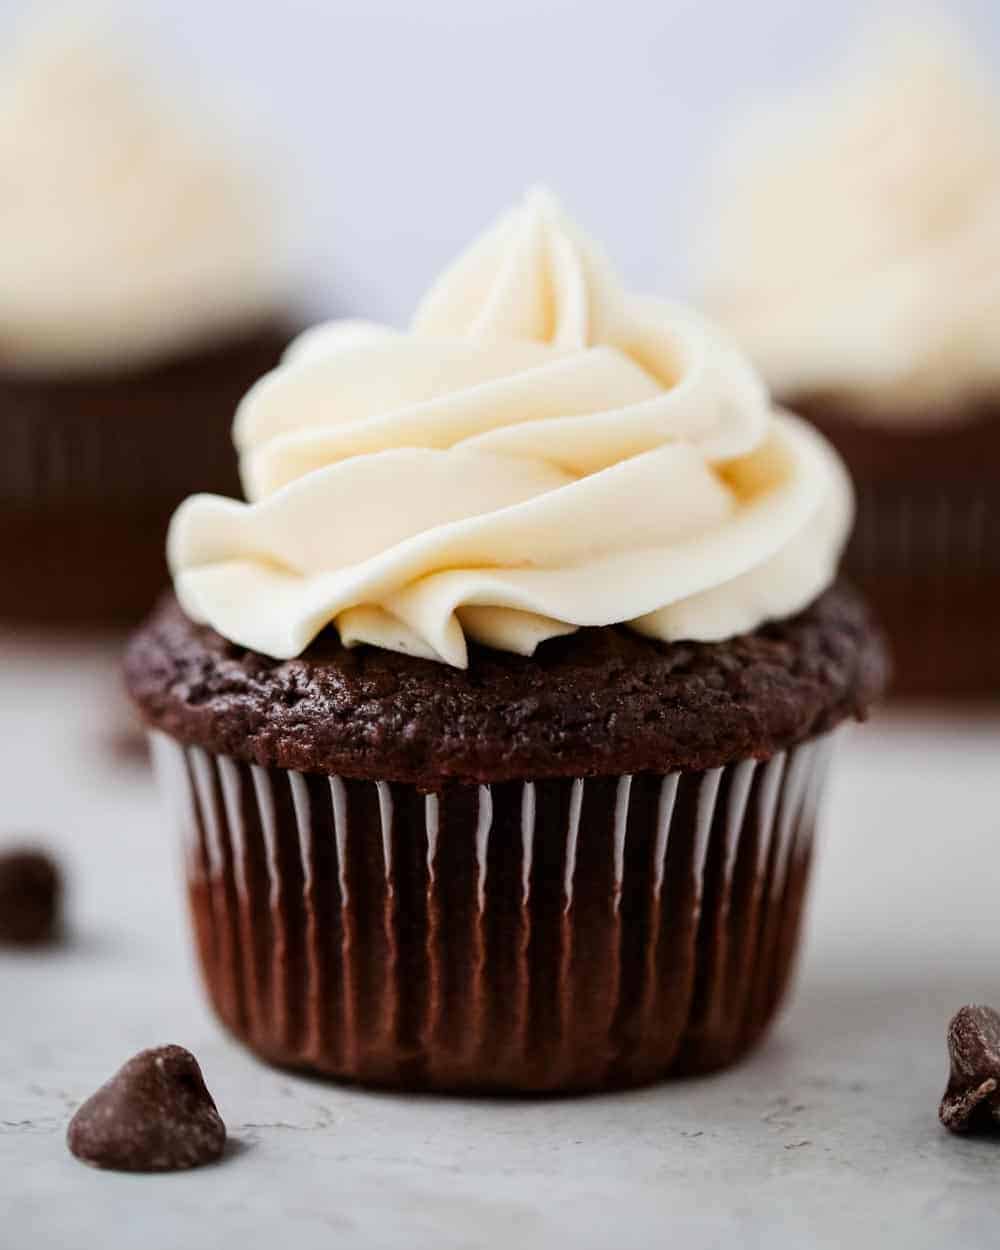 Chocolate cupcake with buttercream frosting.